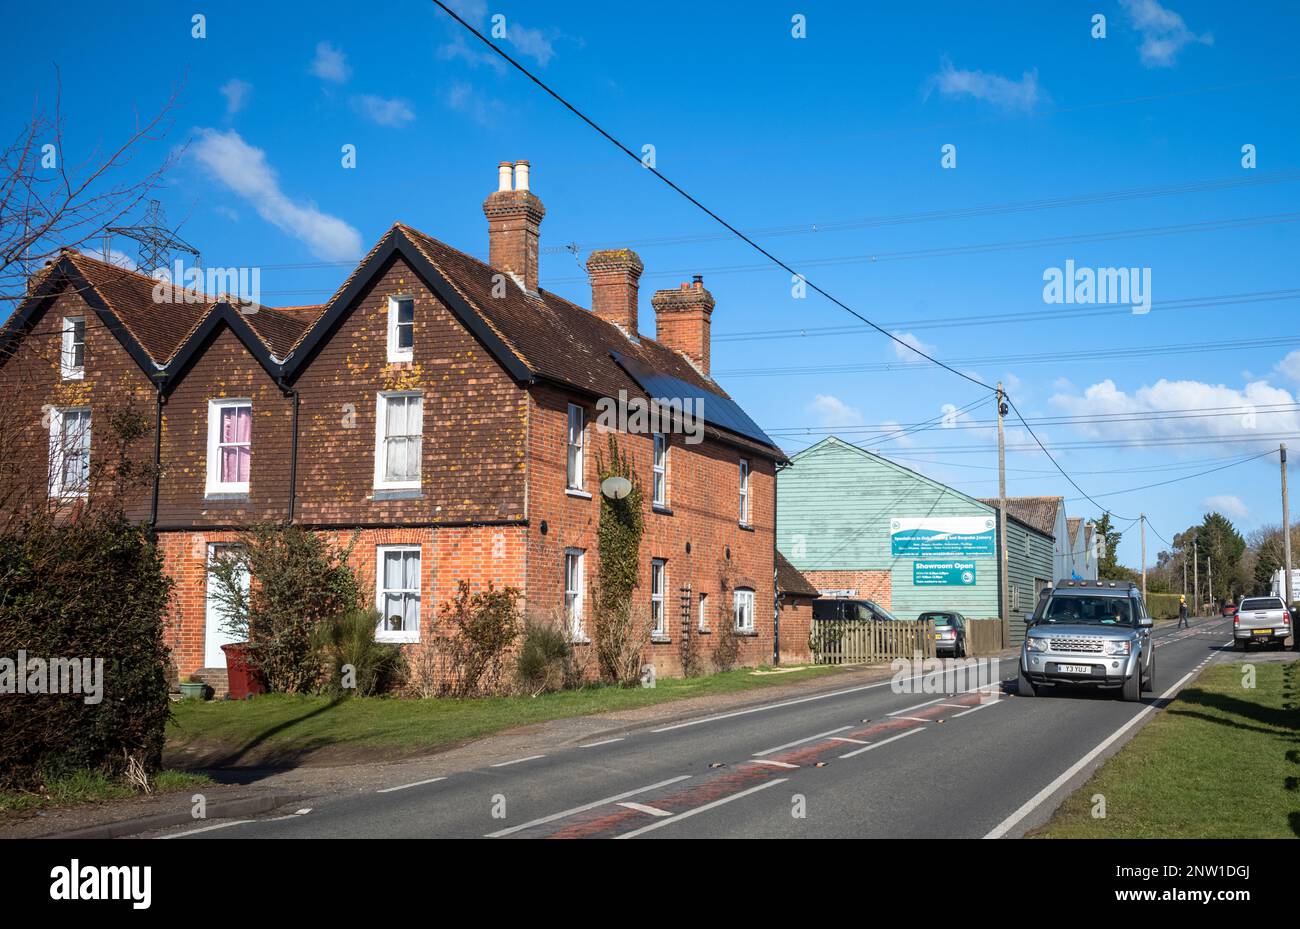 A Land Rover Discovery car drives past some ancient cottages on a country road in Wisborough Green, UK. Stock Photo